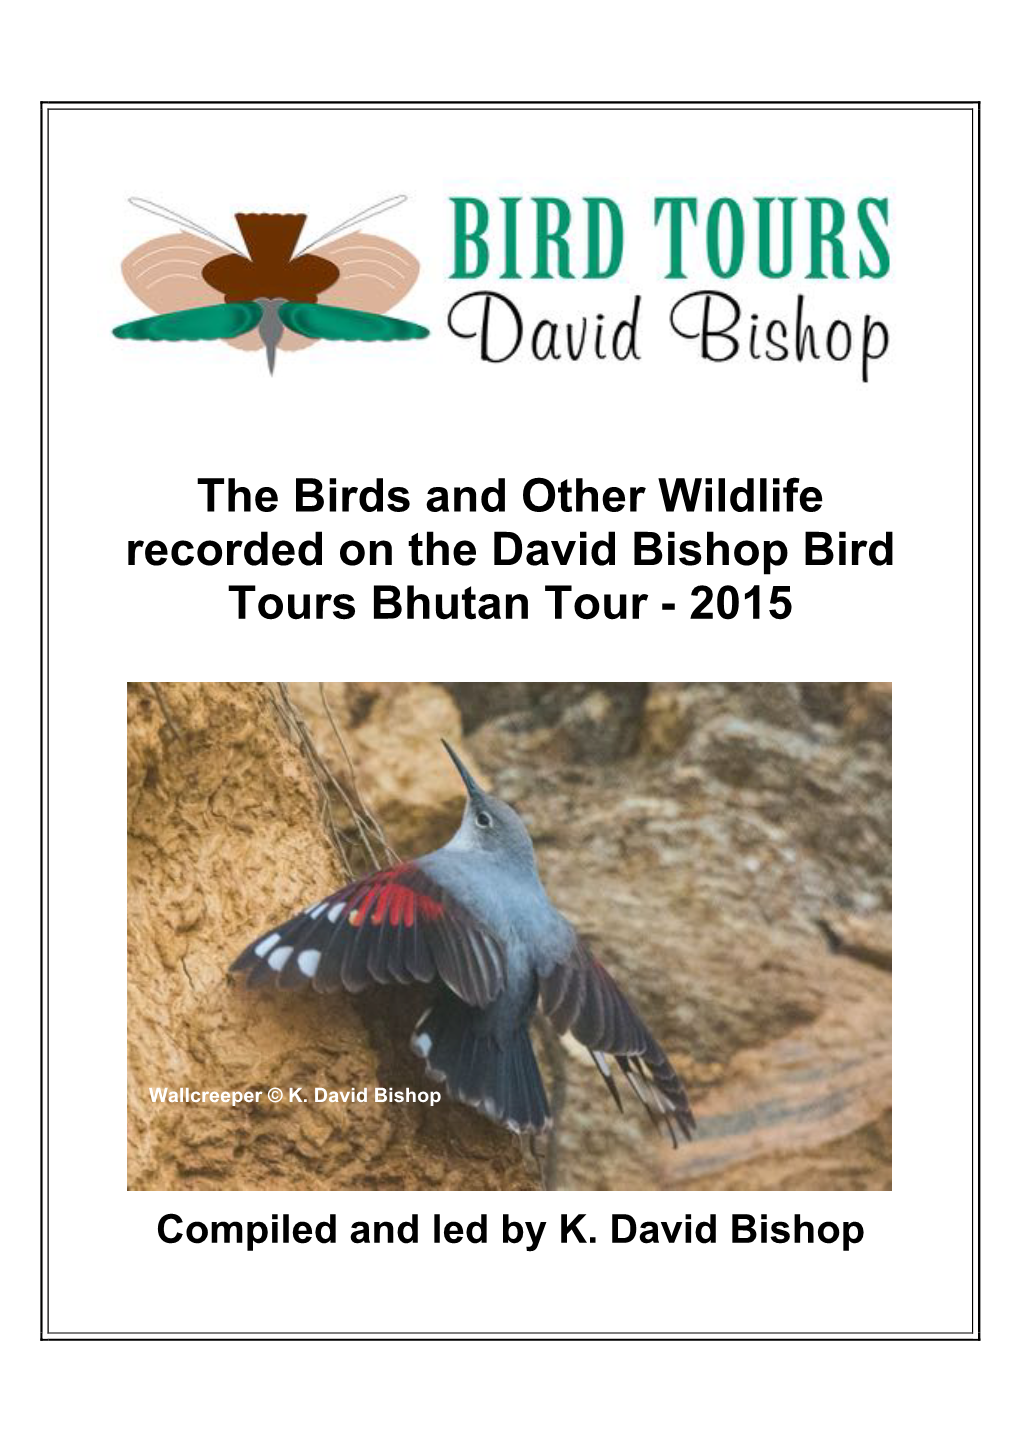 The Birds and Other Wildlife Recorded on the David Bishop Bird Tours Bhutan Tour - 2015